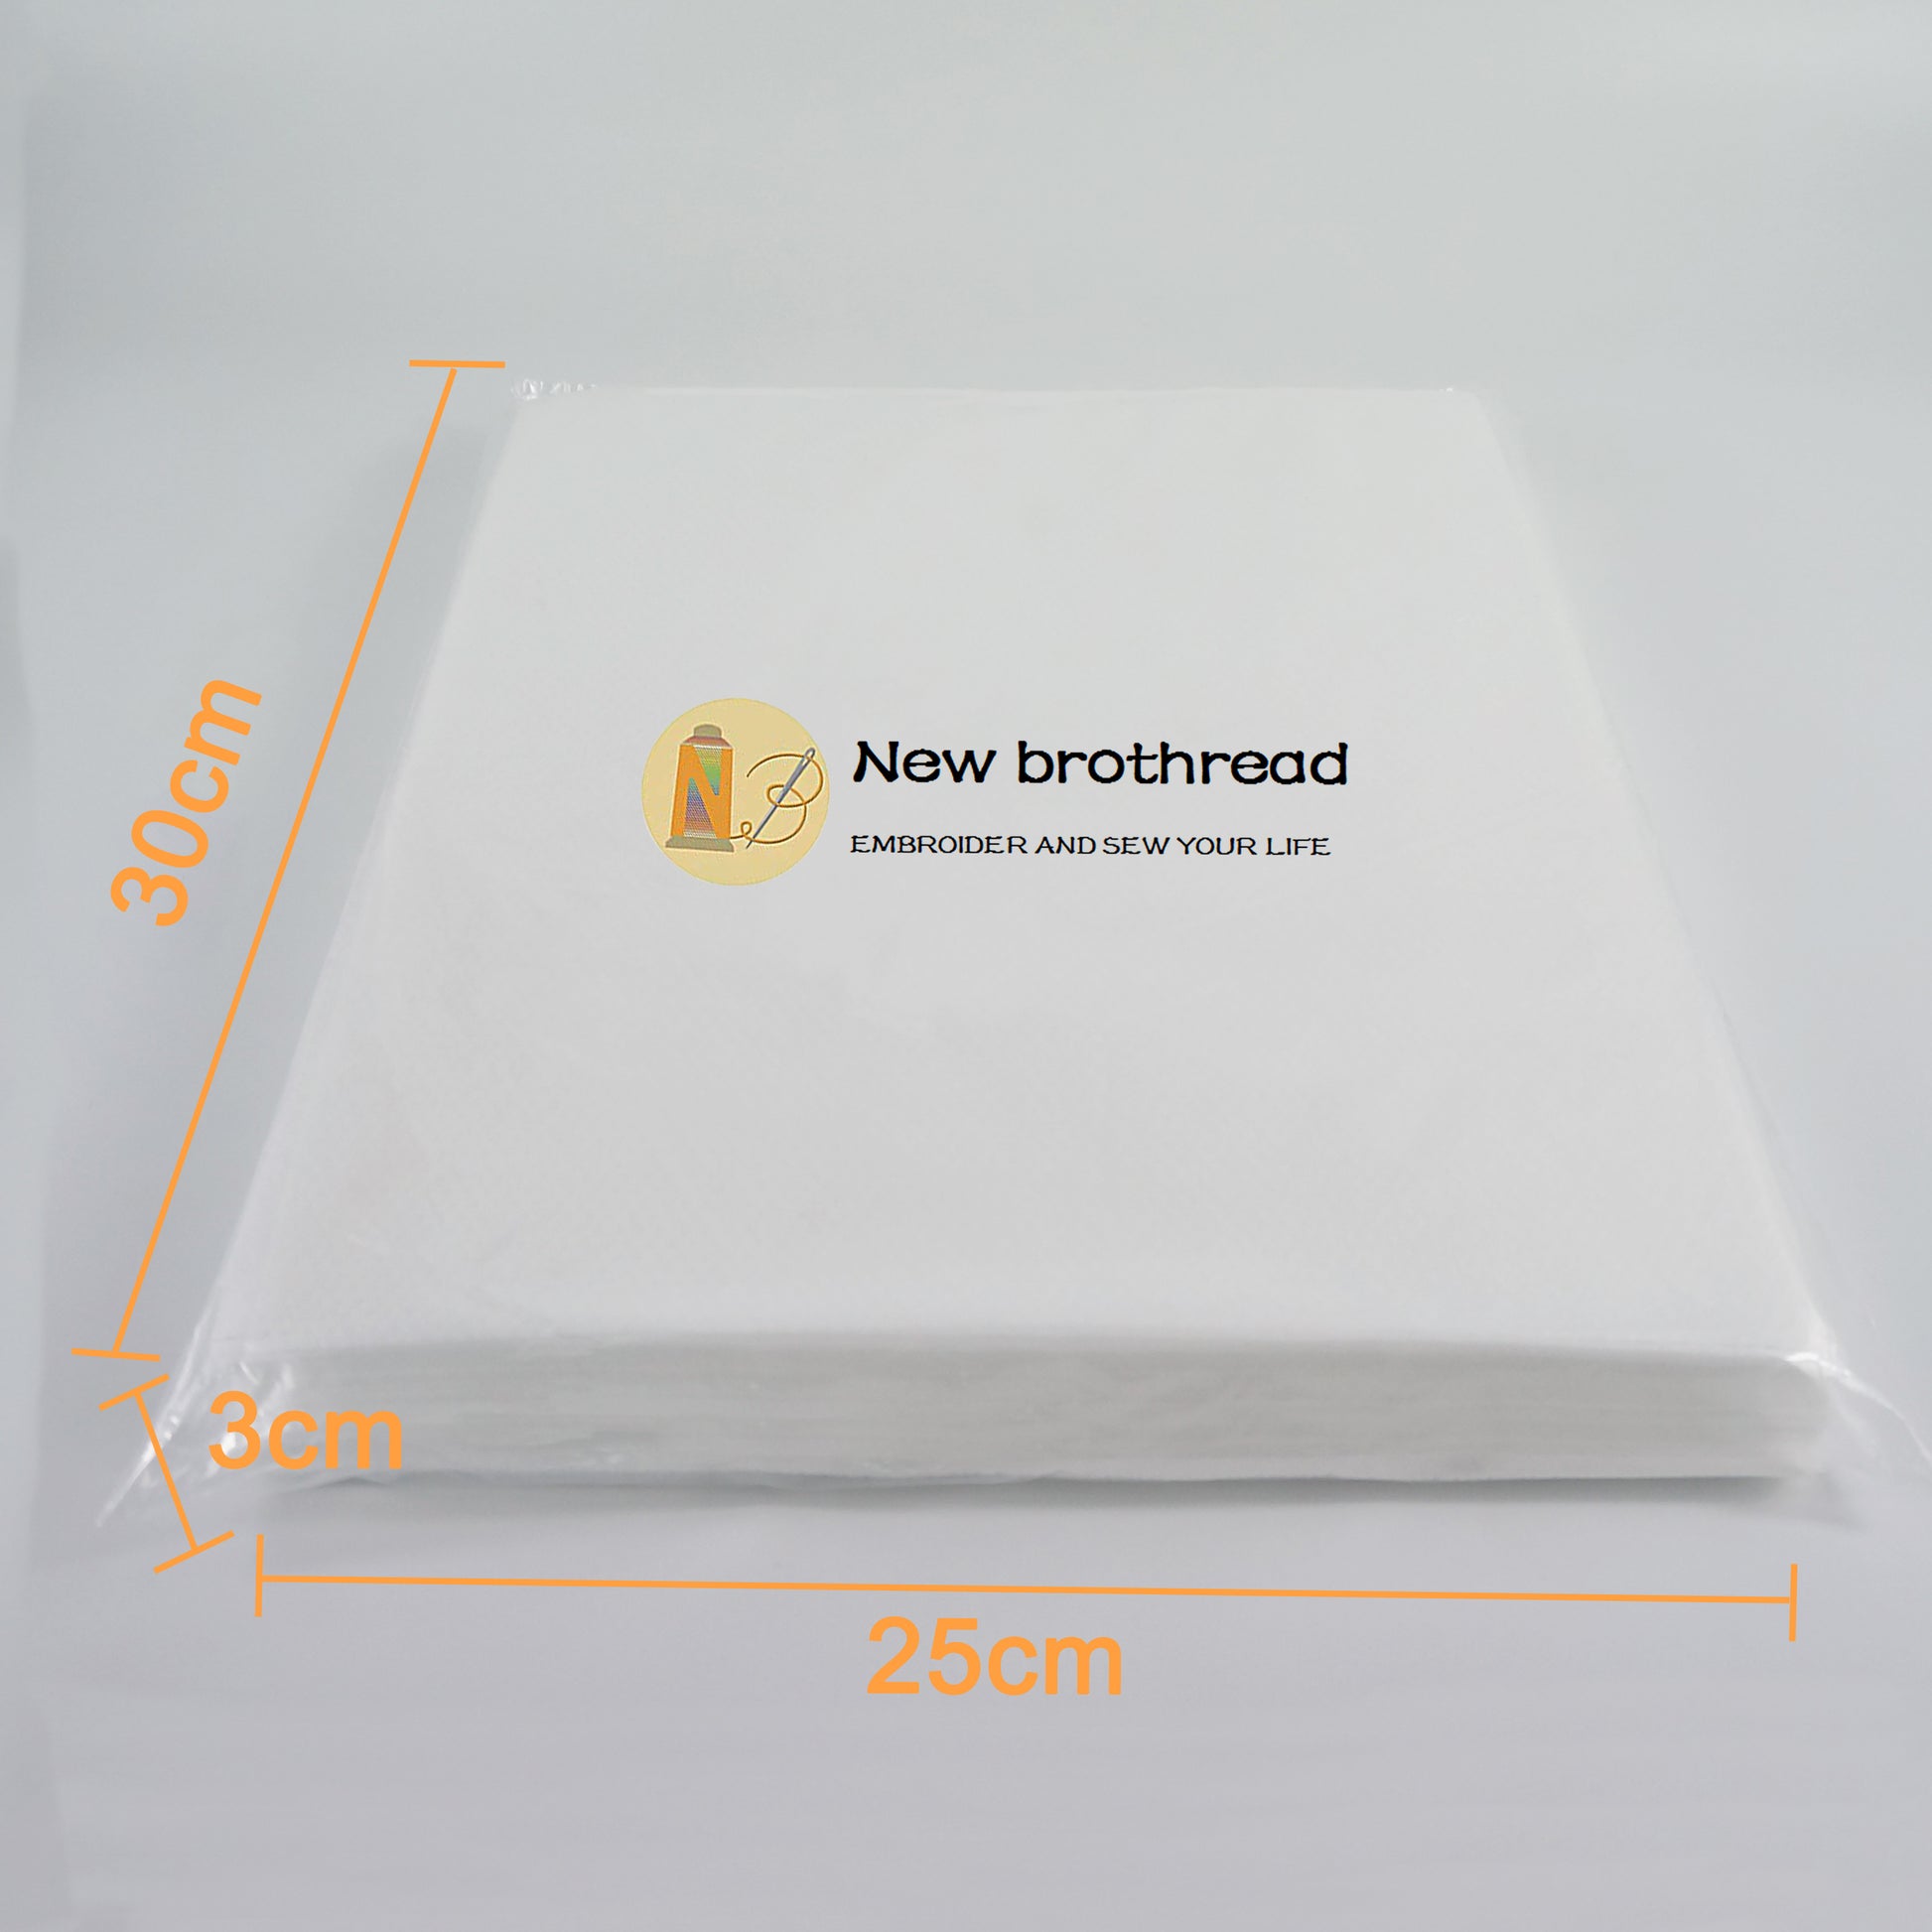 New brothread No Show Mesh Machine Embroidery Stabilizer Backing - Light  Weight 1.8 oz